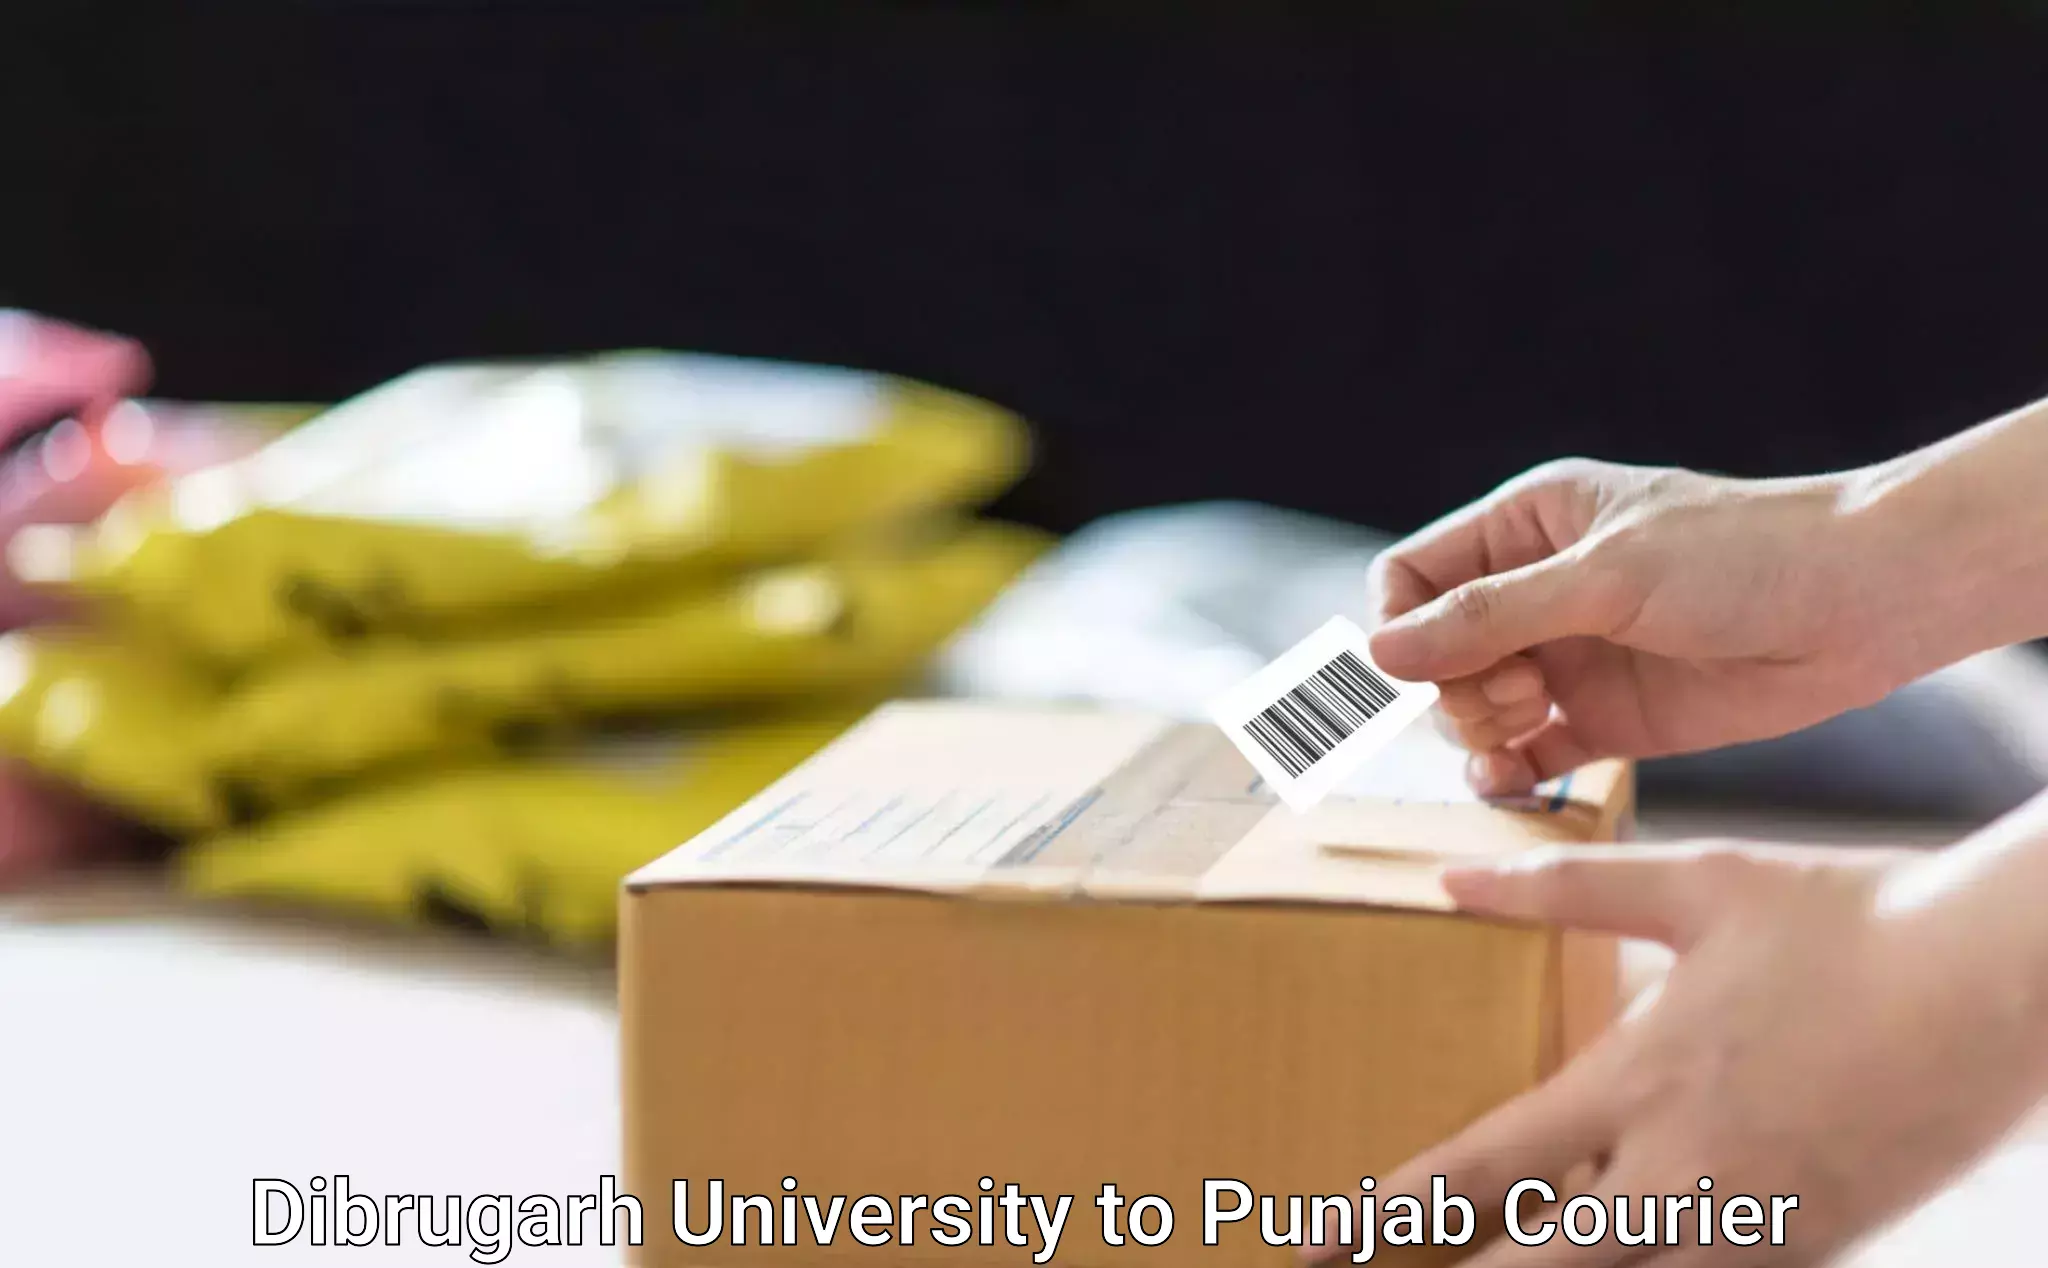 Personal parcel delivery in Dibrugarh University to Rampura Phul